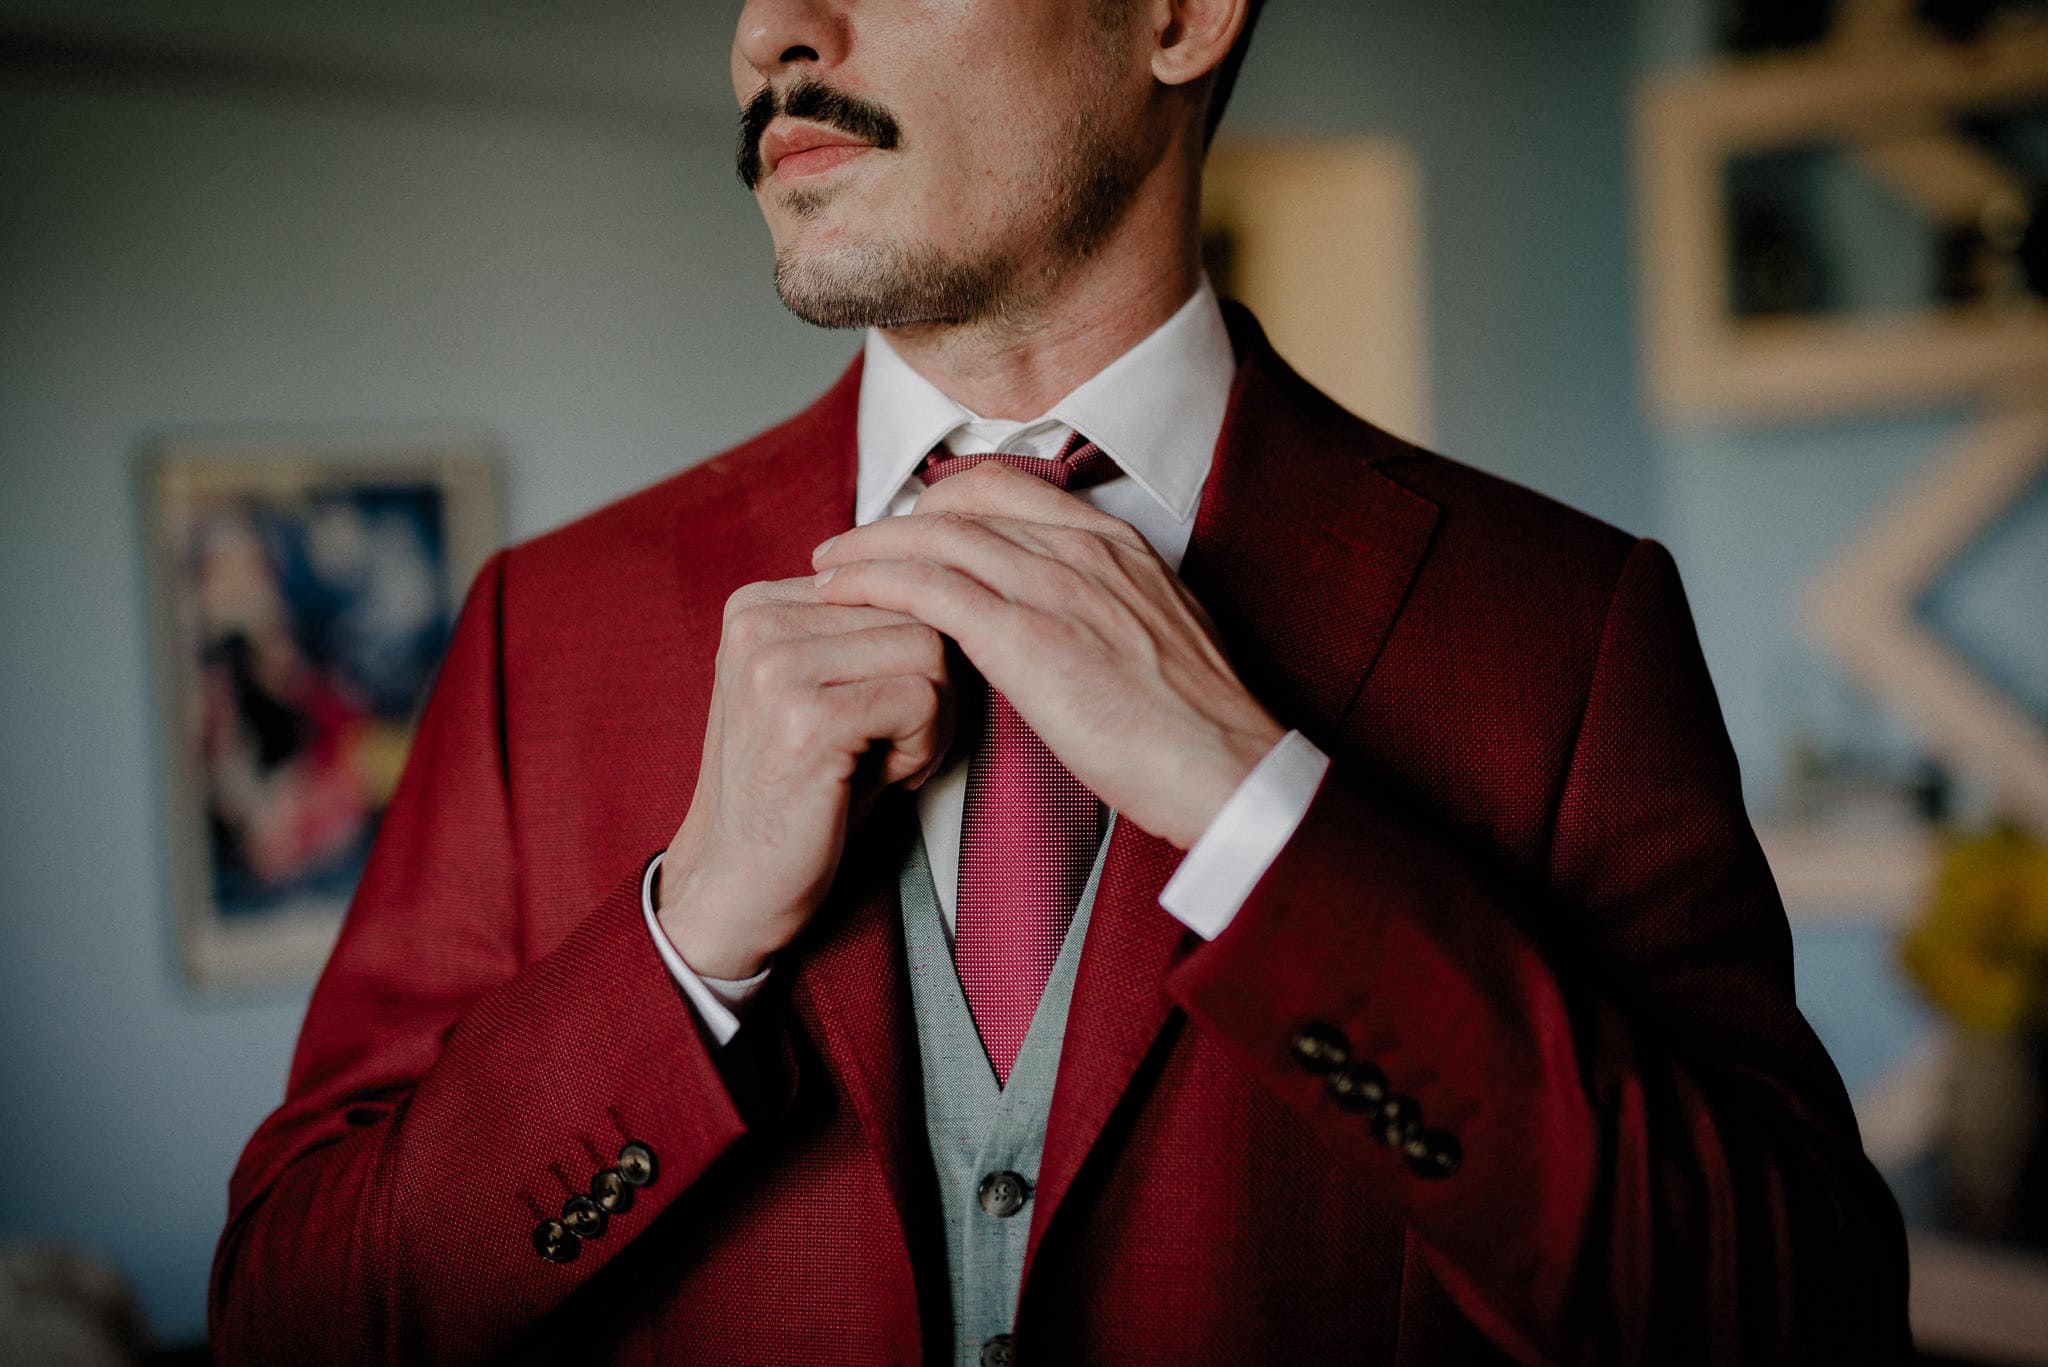 groom's burgundy outfit according to the autumn wedding theme